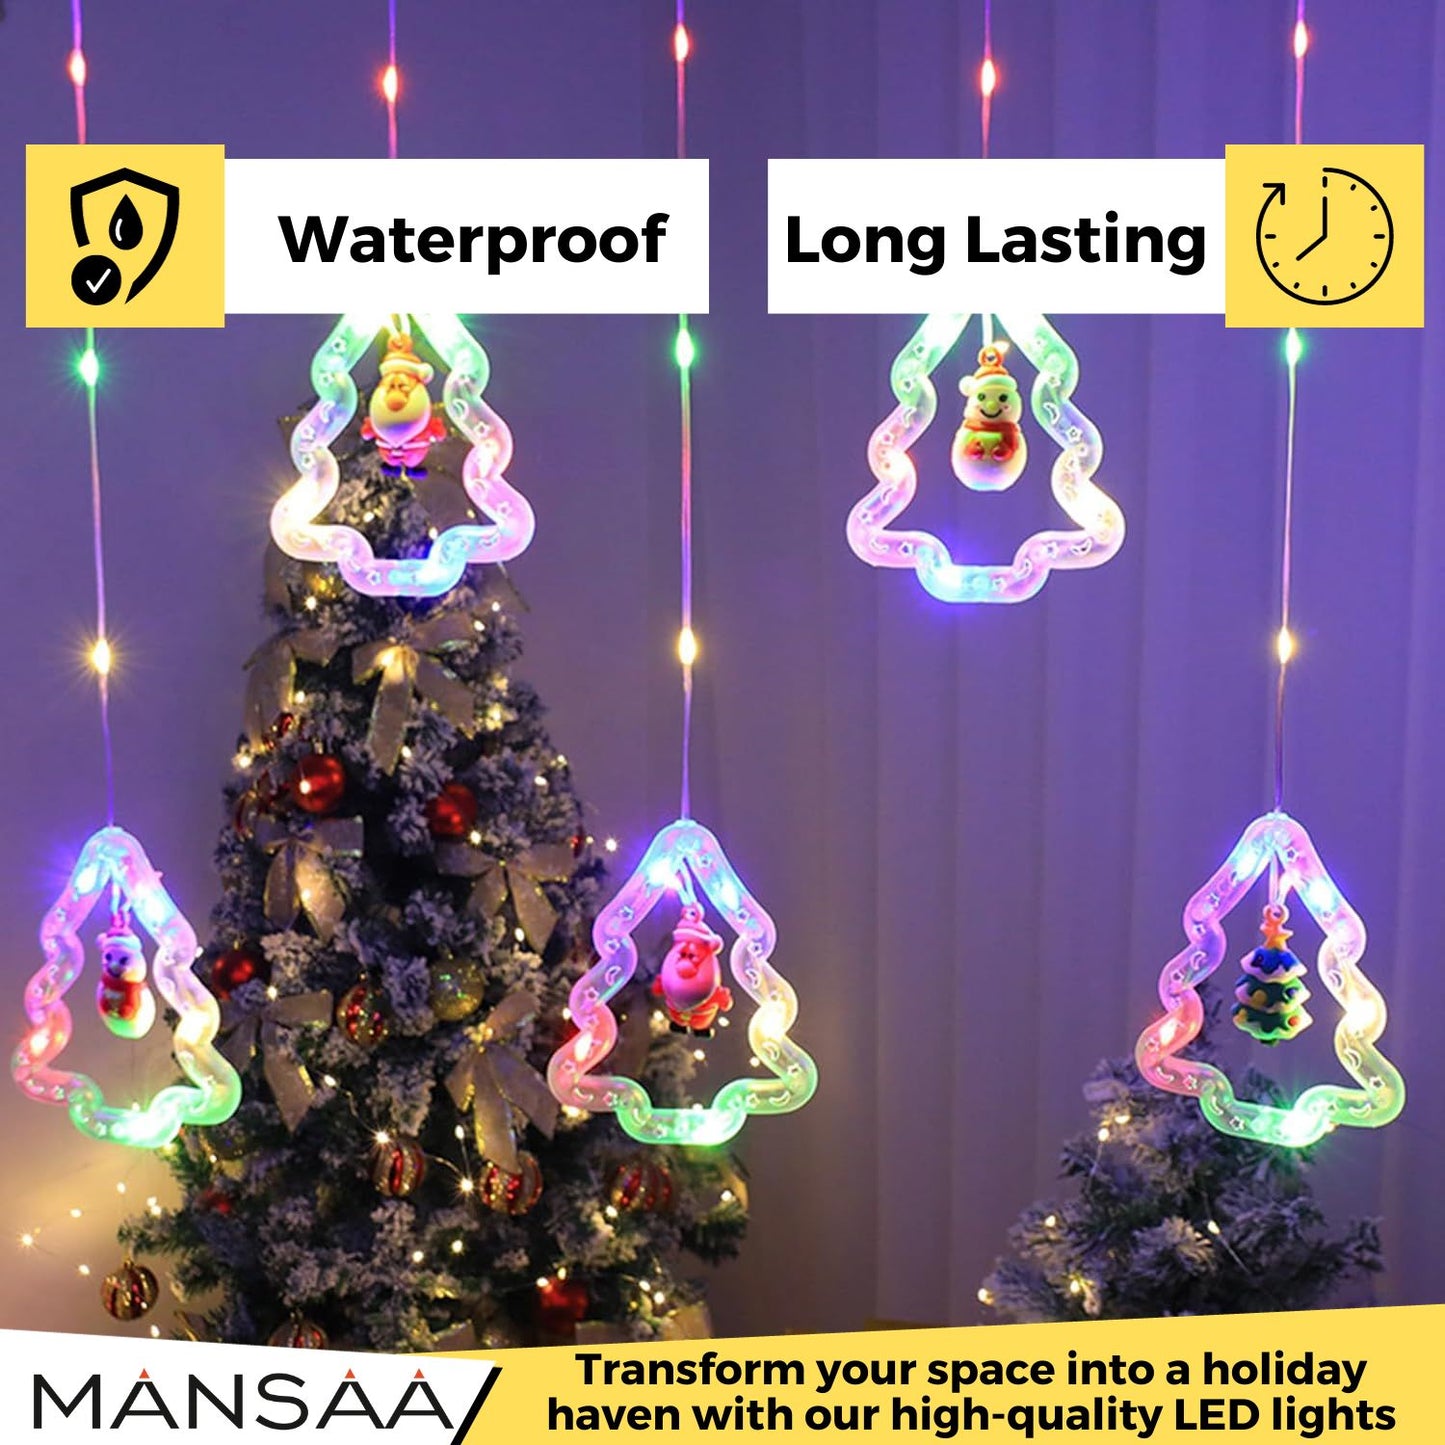 Christmas Tree Lights, 4 Meter Direct Plug Christmas Light String with 10 Cute icons | DIY Christmas Decor | 8 Blinking Mode | Decorative Fairy curtain Lights for Indoor Outdoor Party Bedroom Home Decor | RGB